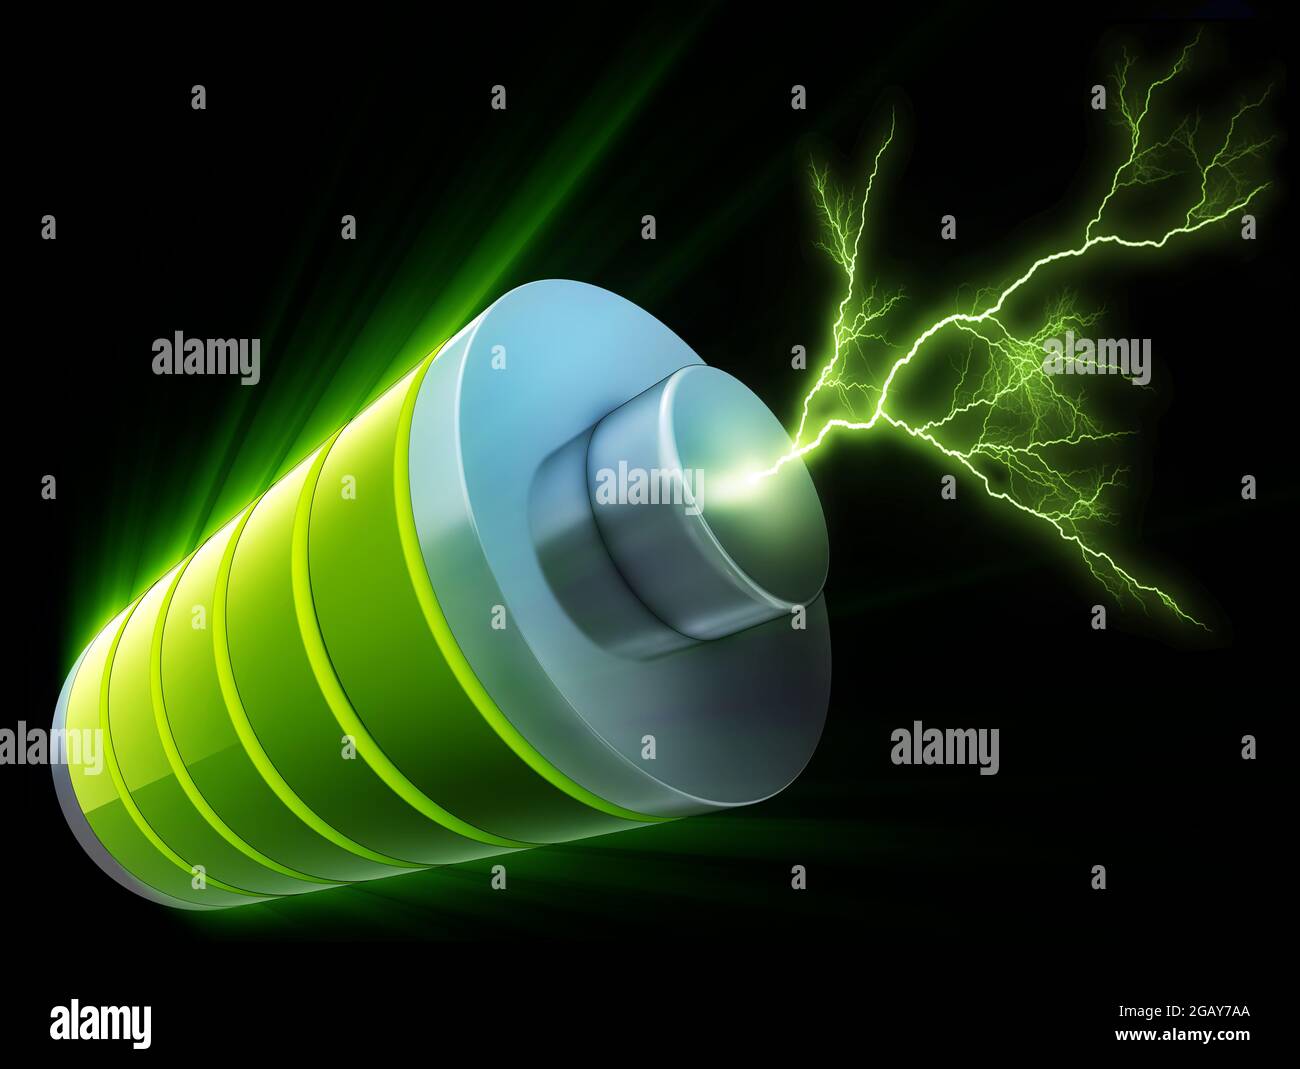 3D illustration of an green battery Stock Photo